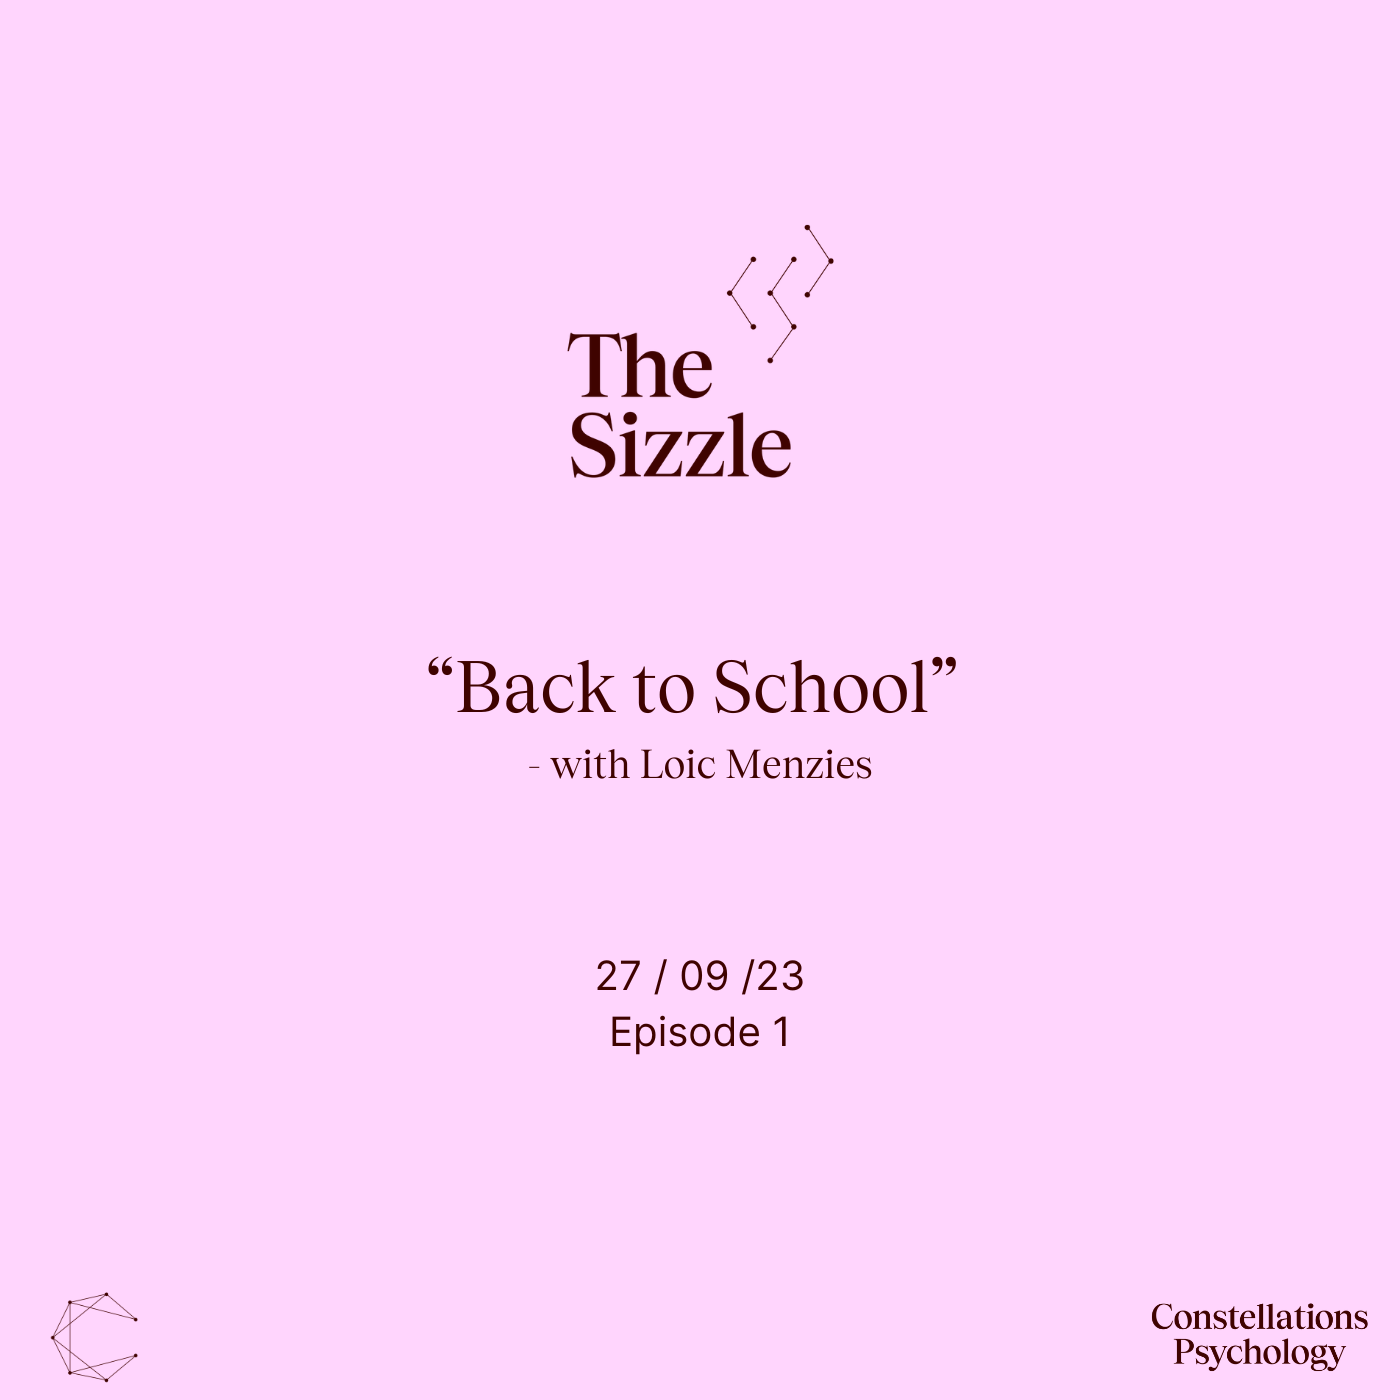 BACK TO SCHOOL with Loic Menzies [Episode 1]